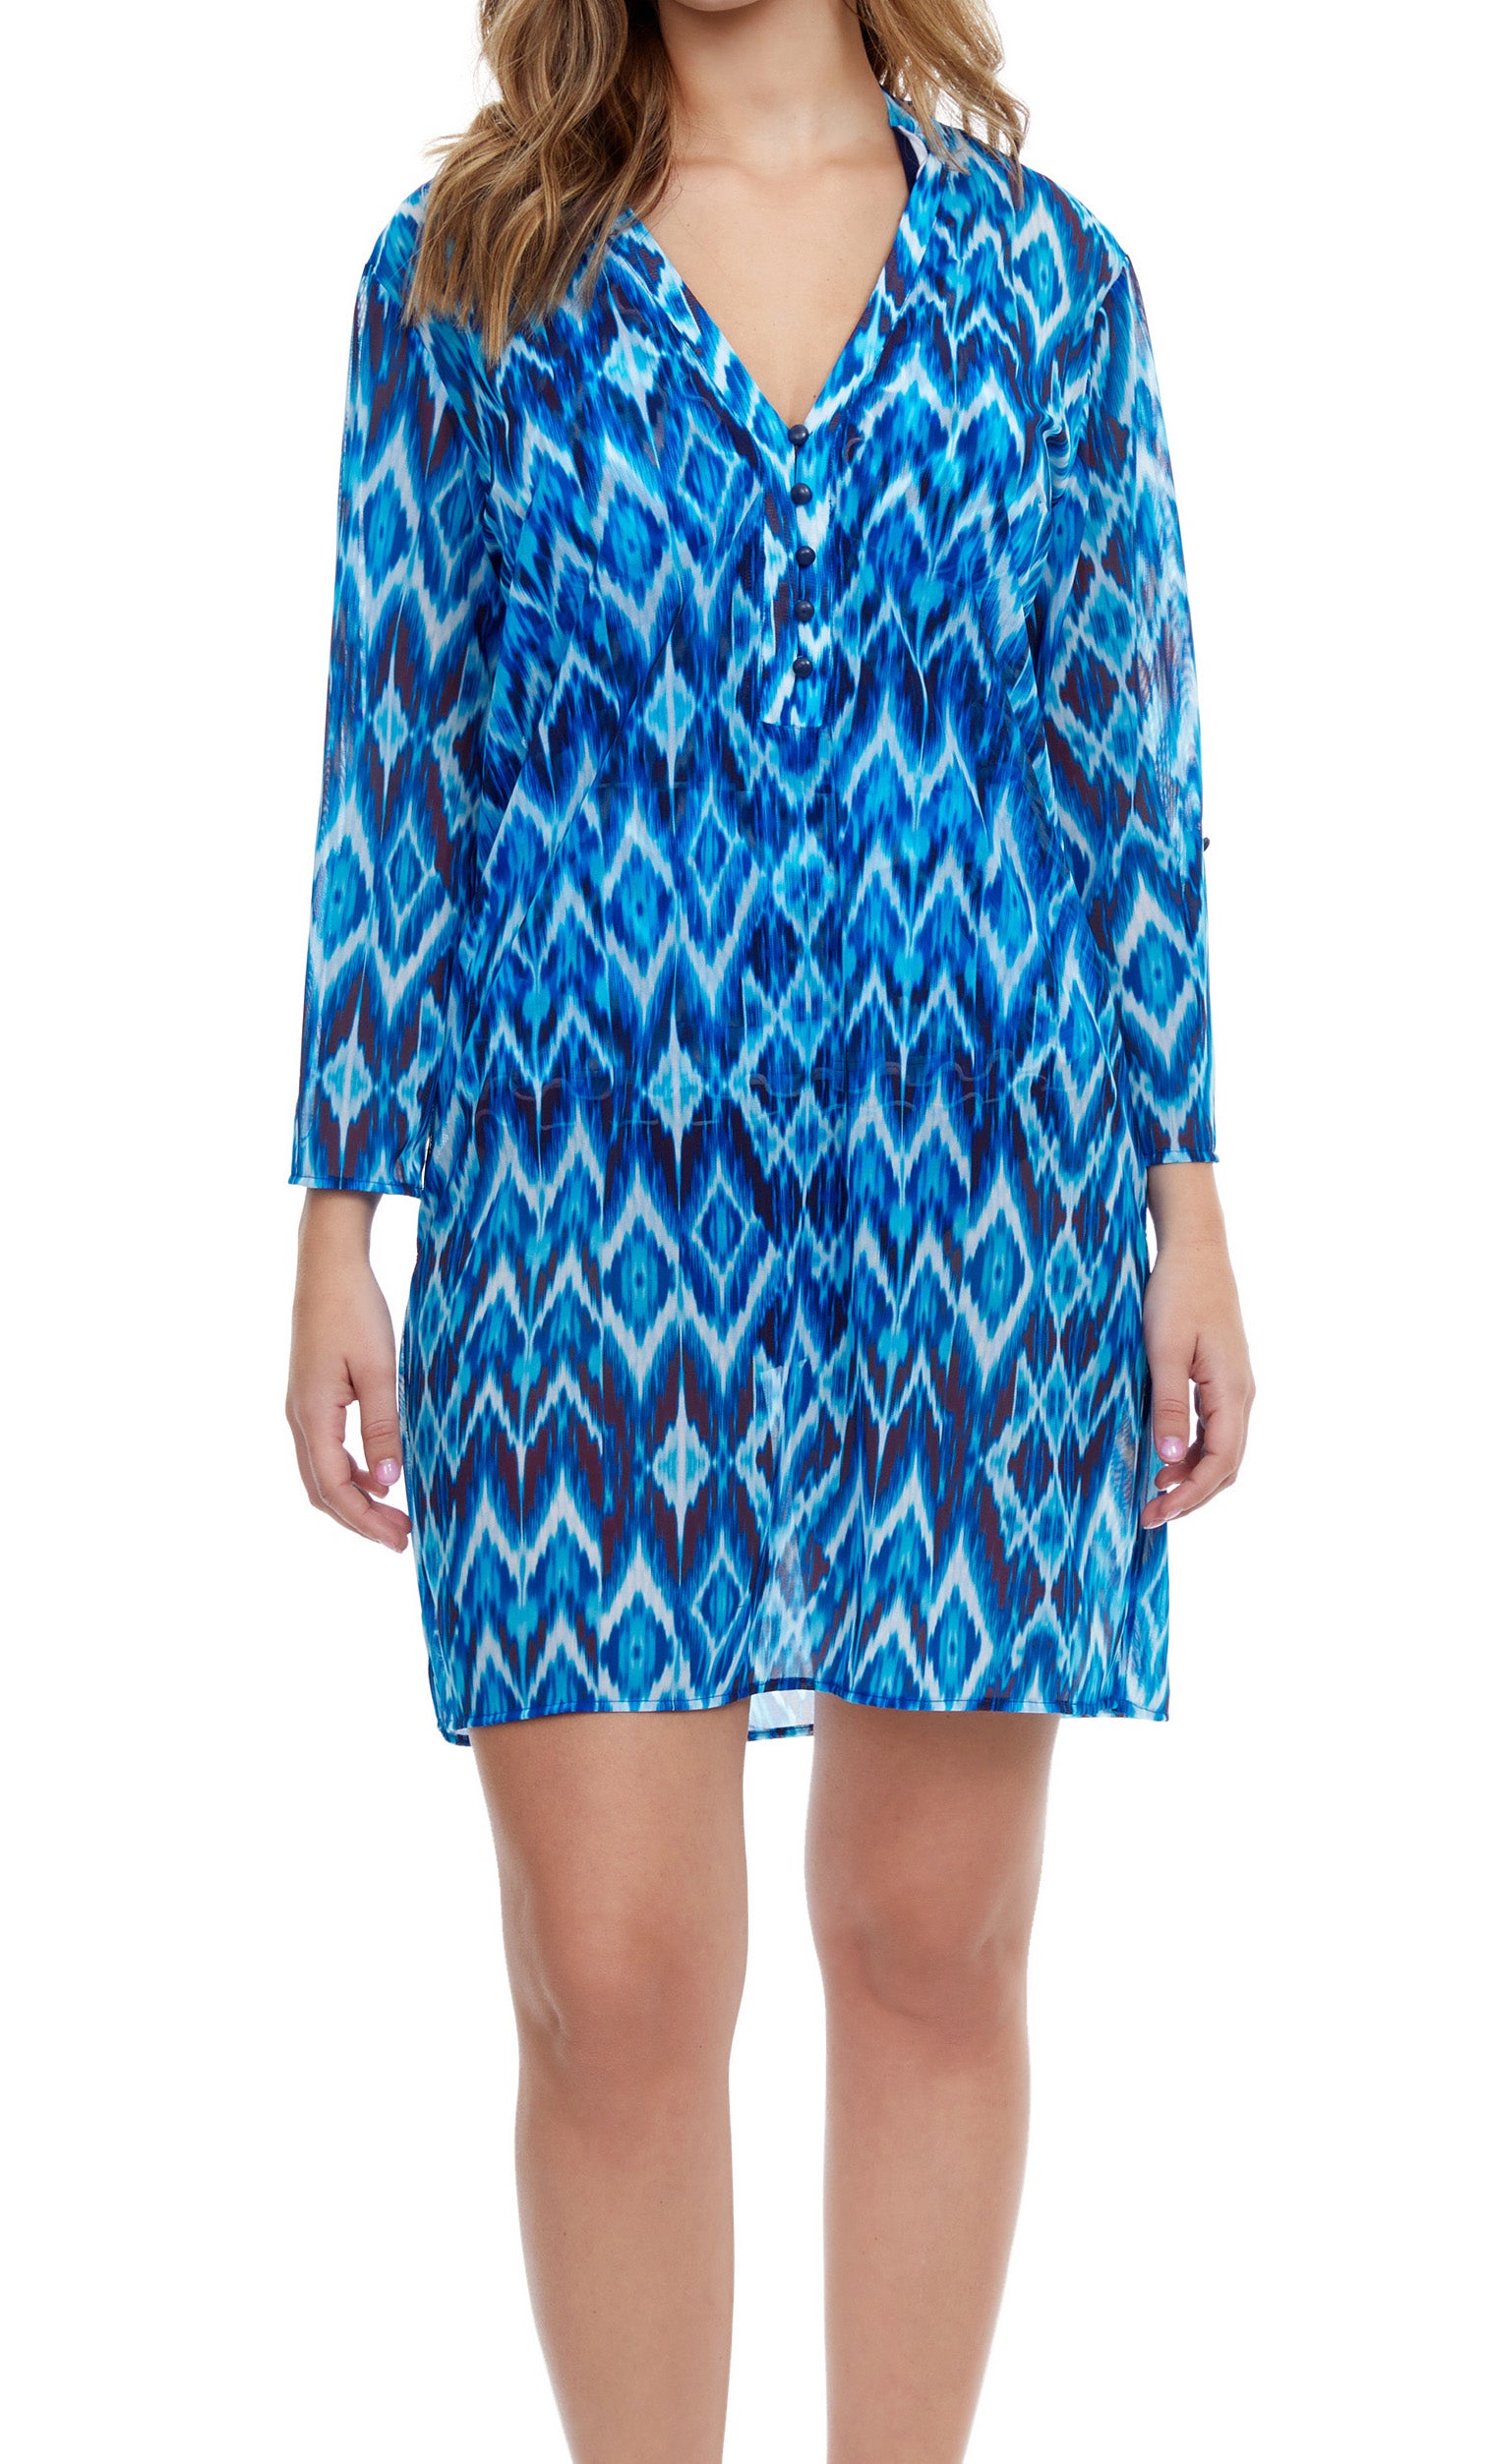 OCEAN BLUES COLLECTION  V Neck Mesh Tunic  Fabric Content: 90% Polyamide 10%Elastane Made in Morocco  Product#: E2303-3032